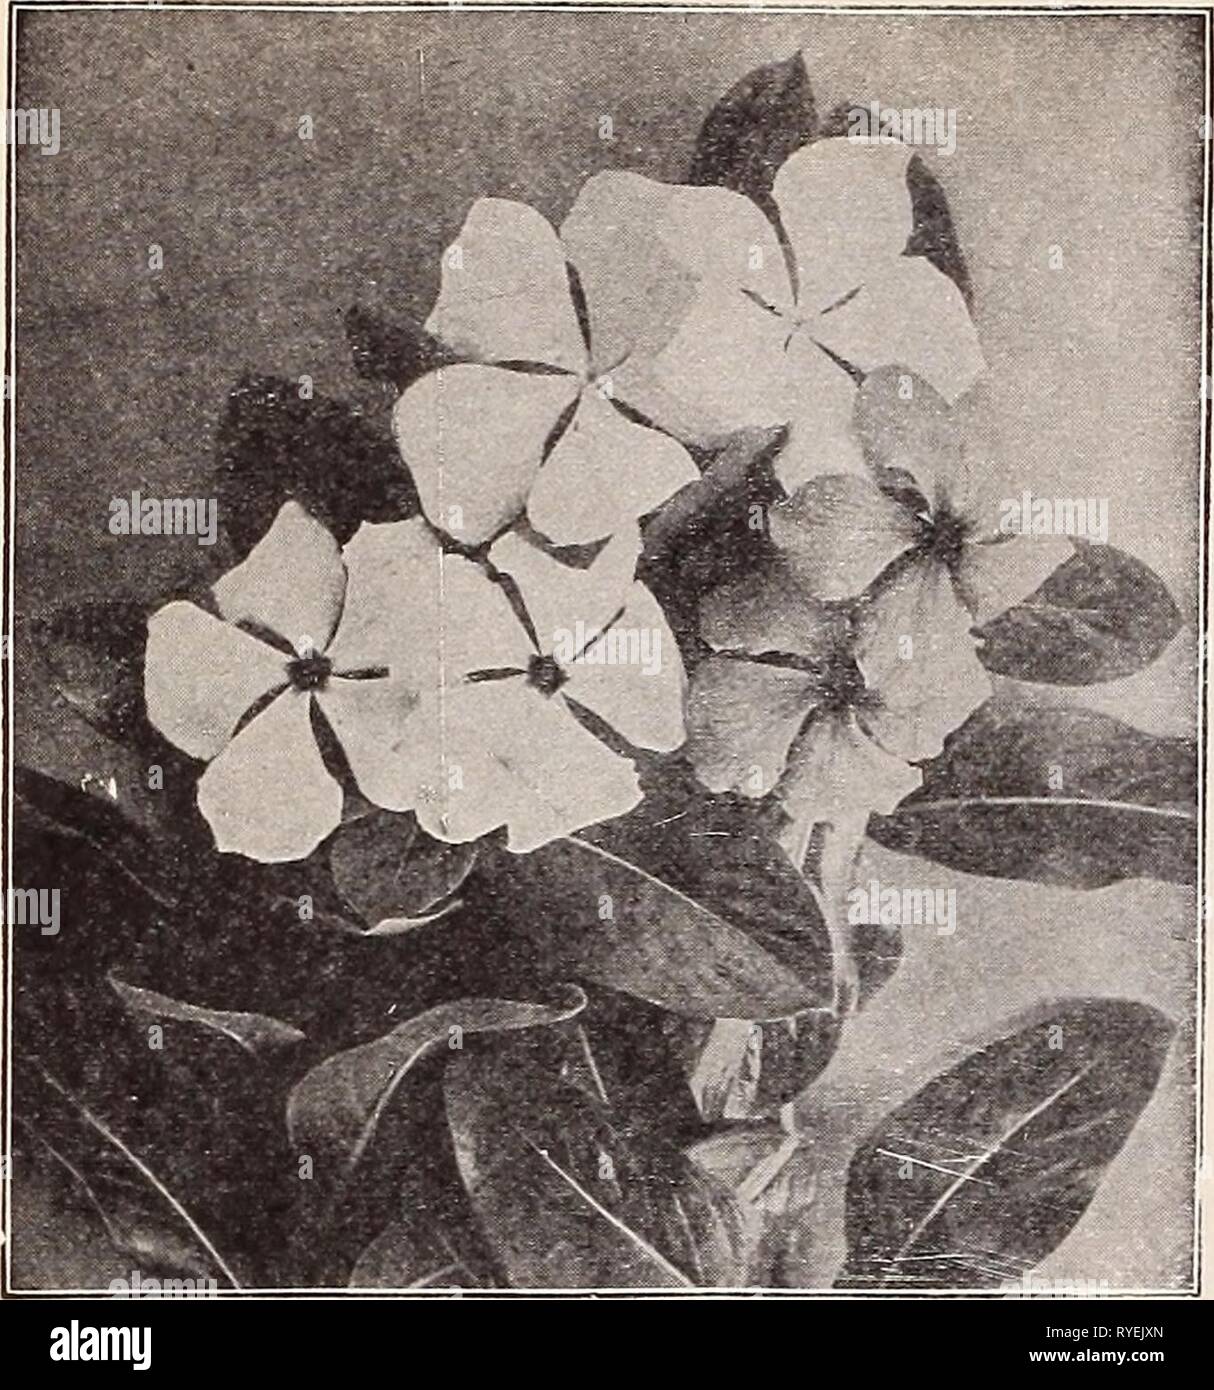 Dreer's wholesale price list for florists : special spring edition  dreerswholesalep1932henr 2 Year: 1932  20 HENRY A. DREER Flower Seeds WHOLESALE LIST    Vlnca Rosea Verbena Royal Bouquet A new departure in the habit of growth of this popular annual. The plants are upright in growth, 15 to 18 inches tall, with straight stems and large flowers in a brilliant mixture of colors. Excellent for bedding, cutting or as a pot plant. Mixed Colors. 50 cts. per trade pkt.; $2.50 per oz. Verbena Nana Compacta Tr. pkt. Oz. Fireball (New). A dwarf compact Ver- bena about six inches high, literally covered Stock Photo